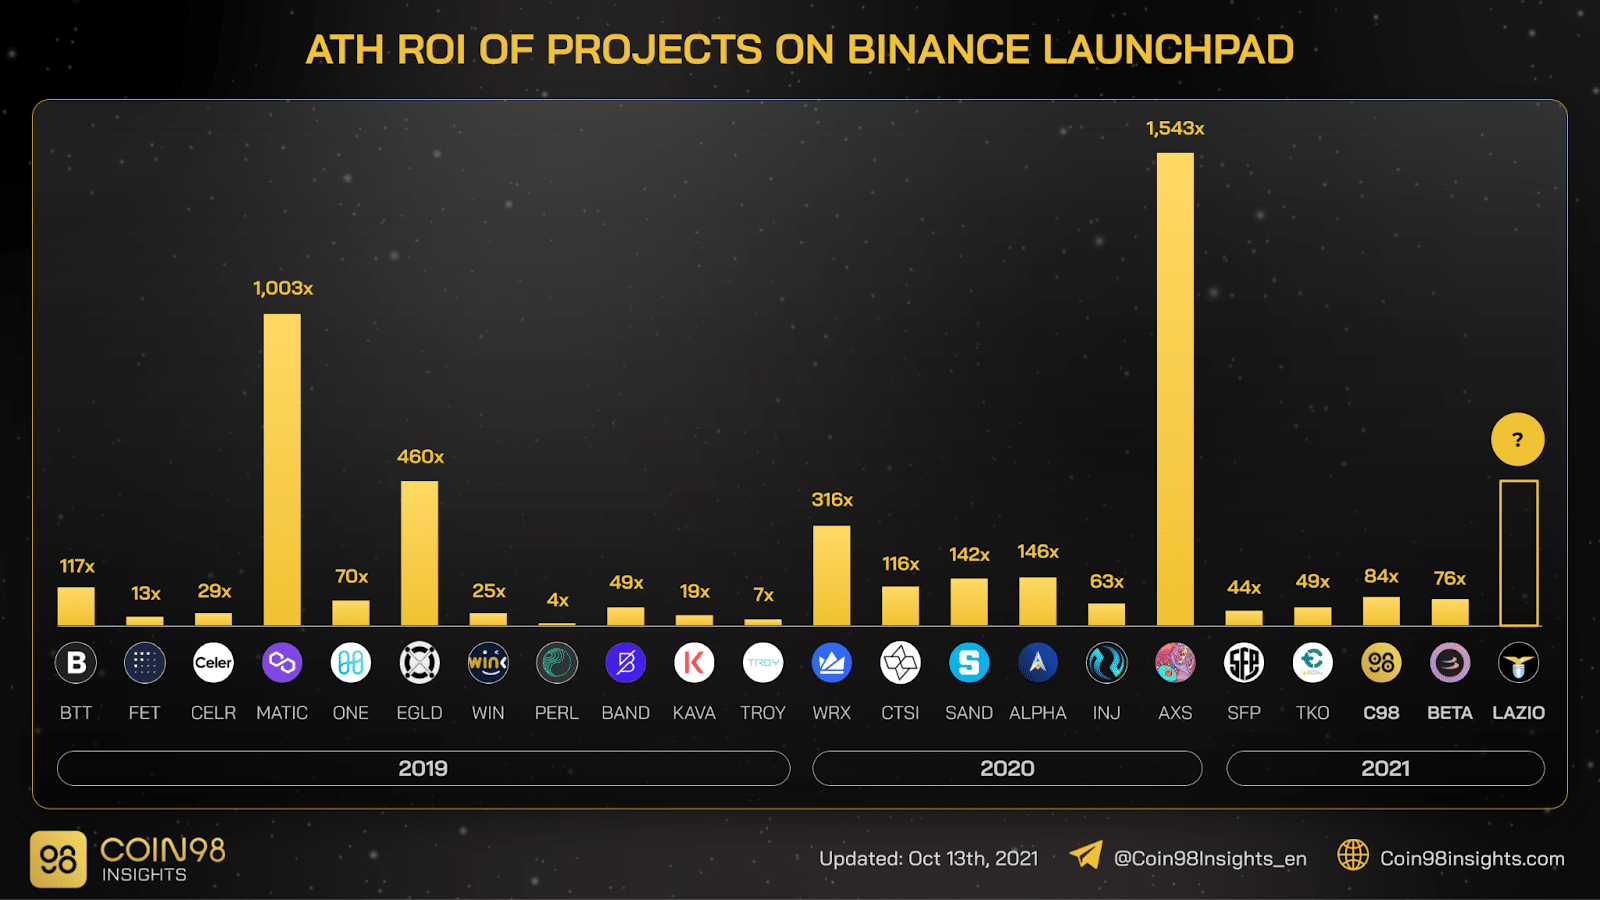 ATH ROI of various Binance Launchpad projects launched from 2019 to 2021.